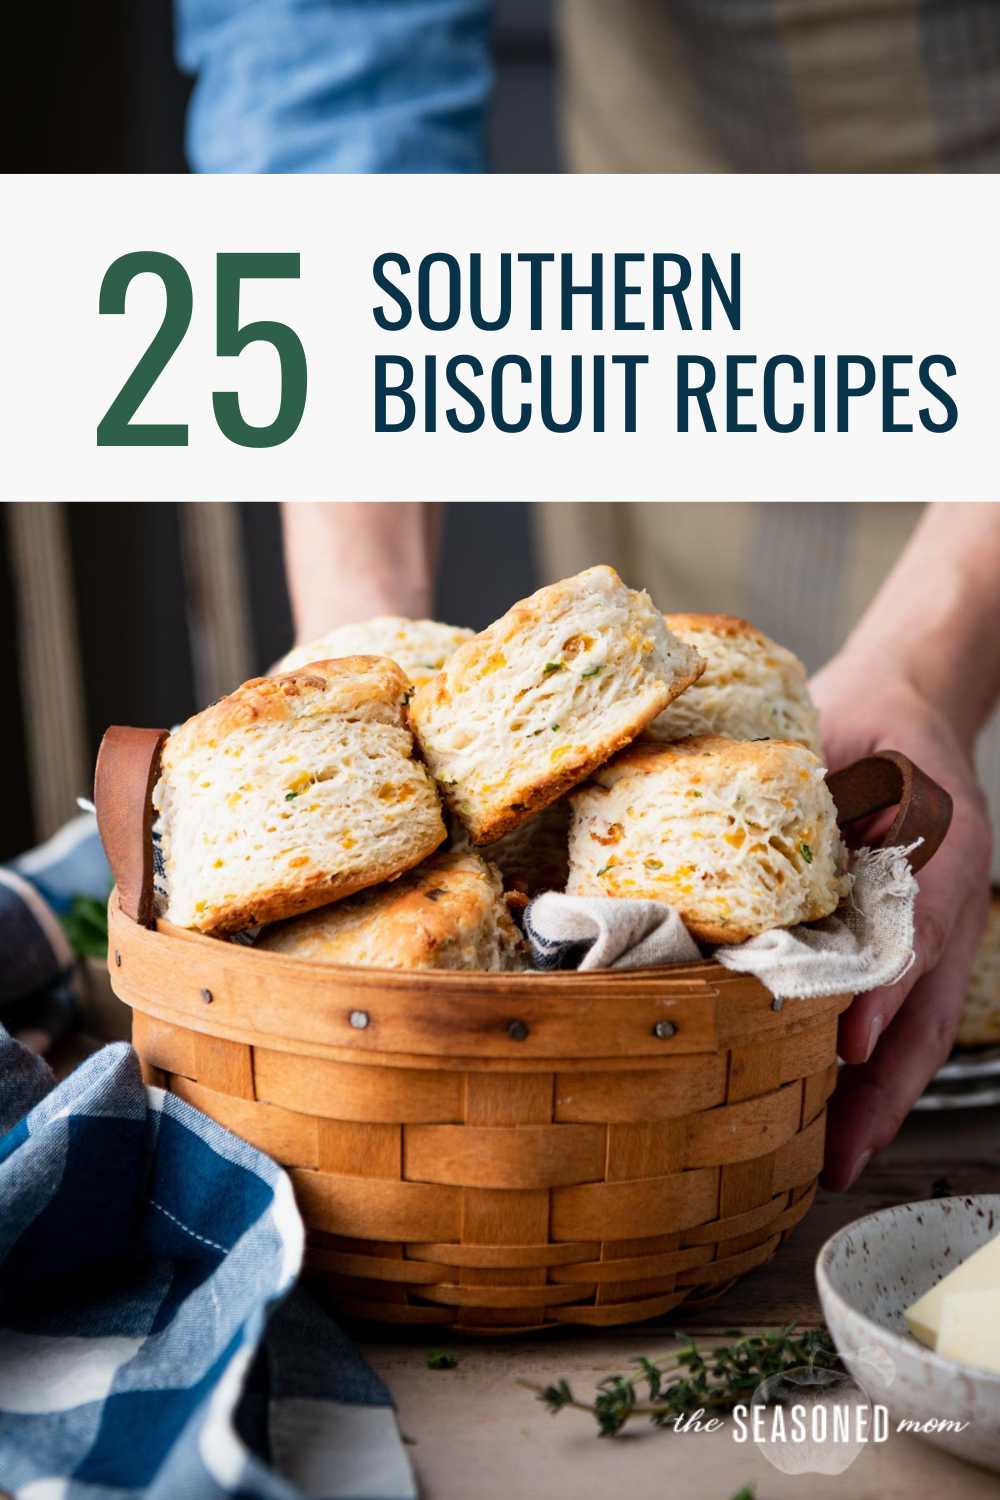 Biscuit recipes collage with text title overlay